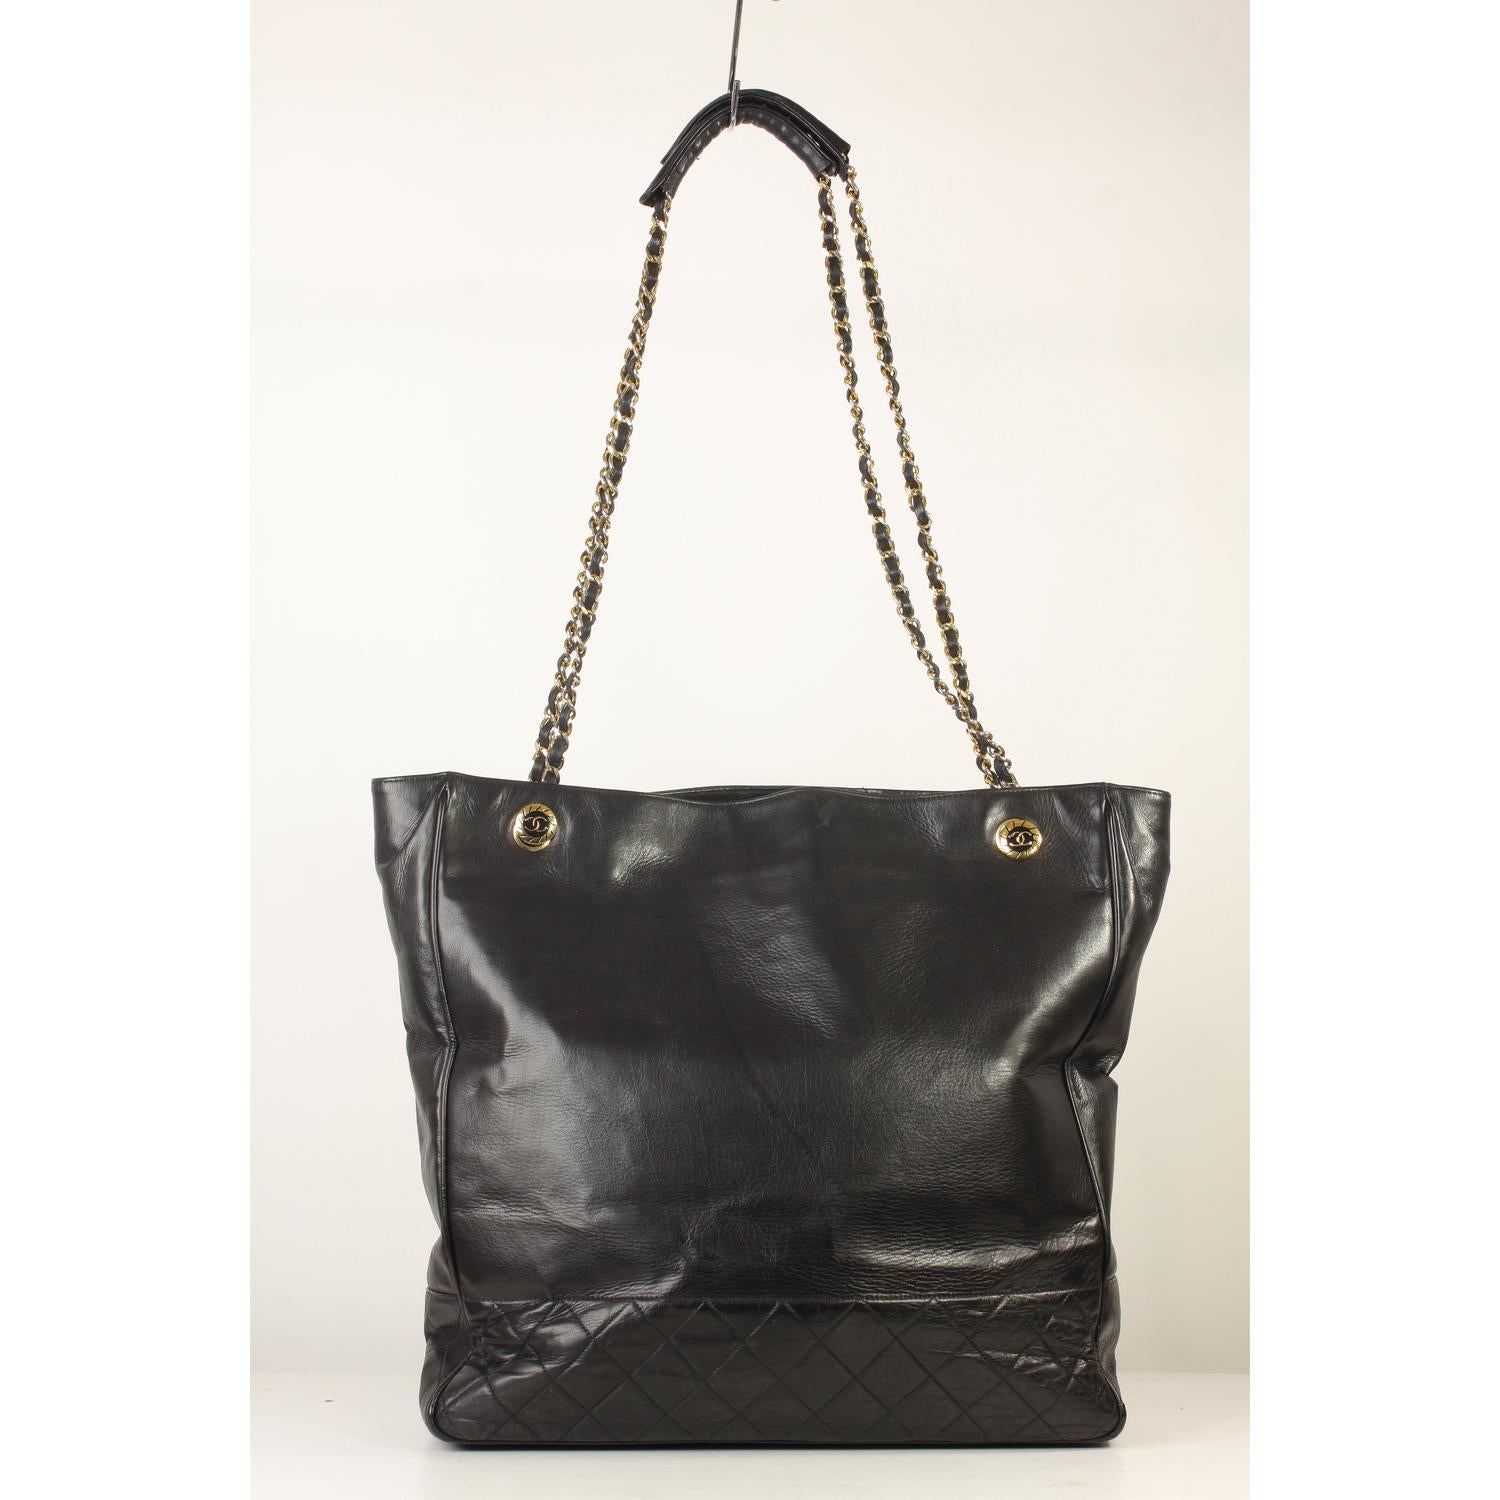 Women's Chanel Vintage Black Quilted Leather Tote Shopping Bag